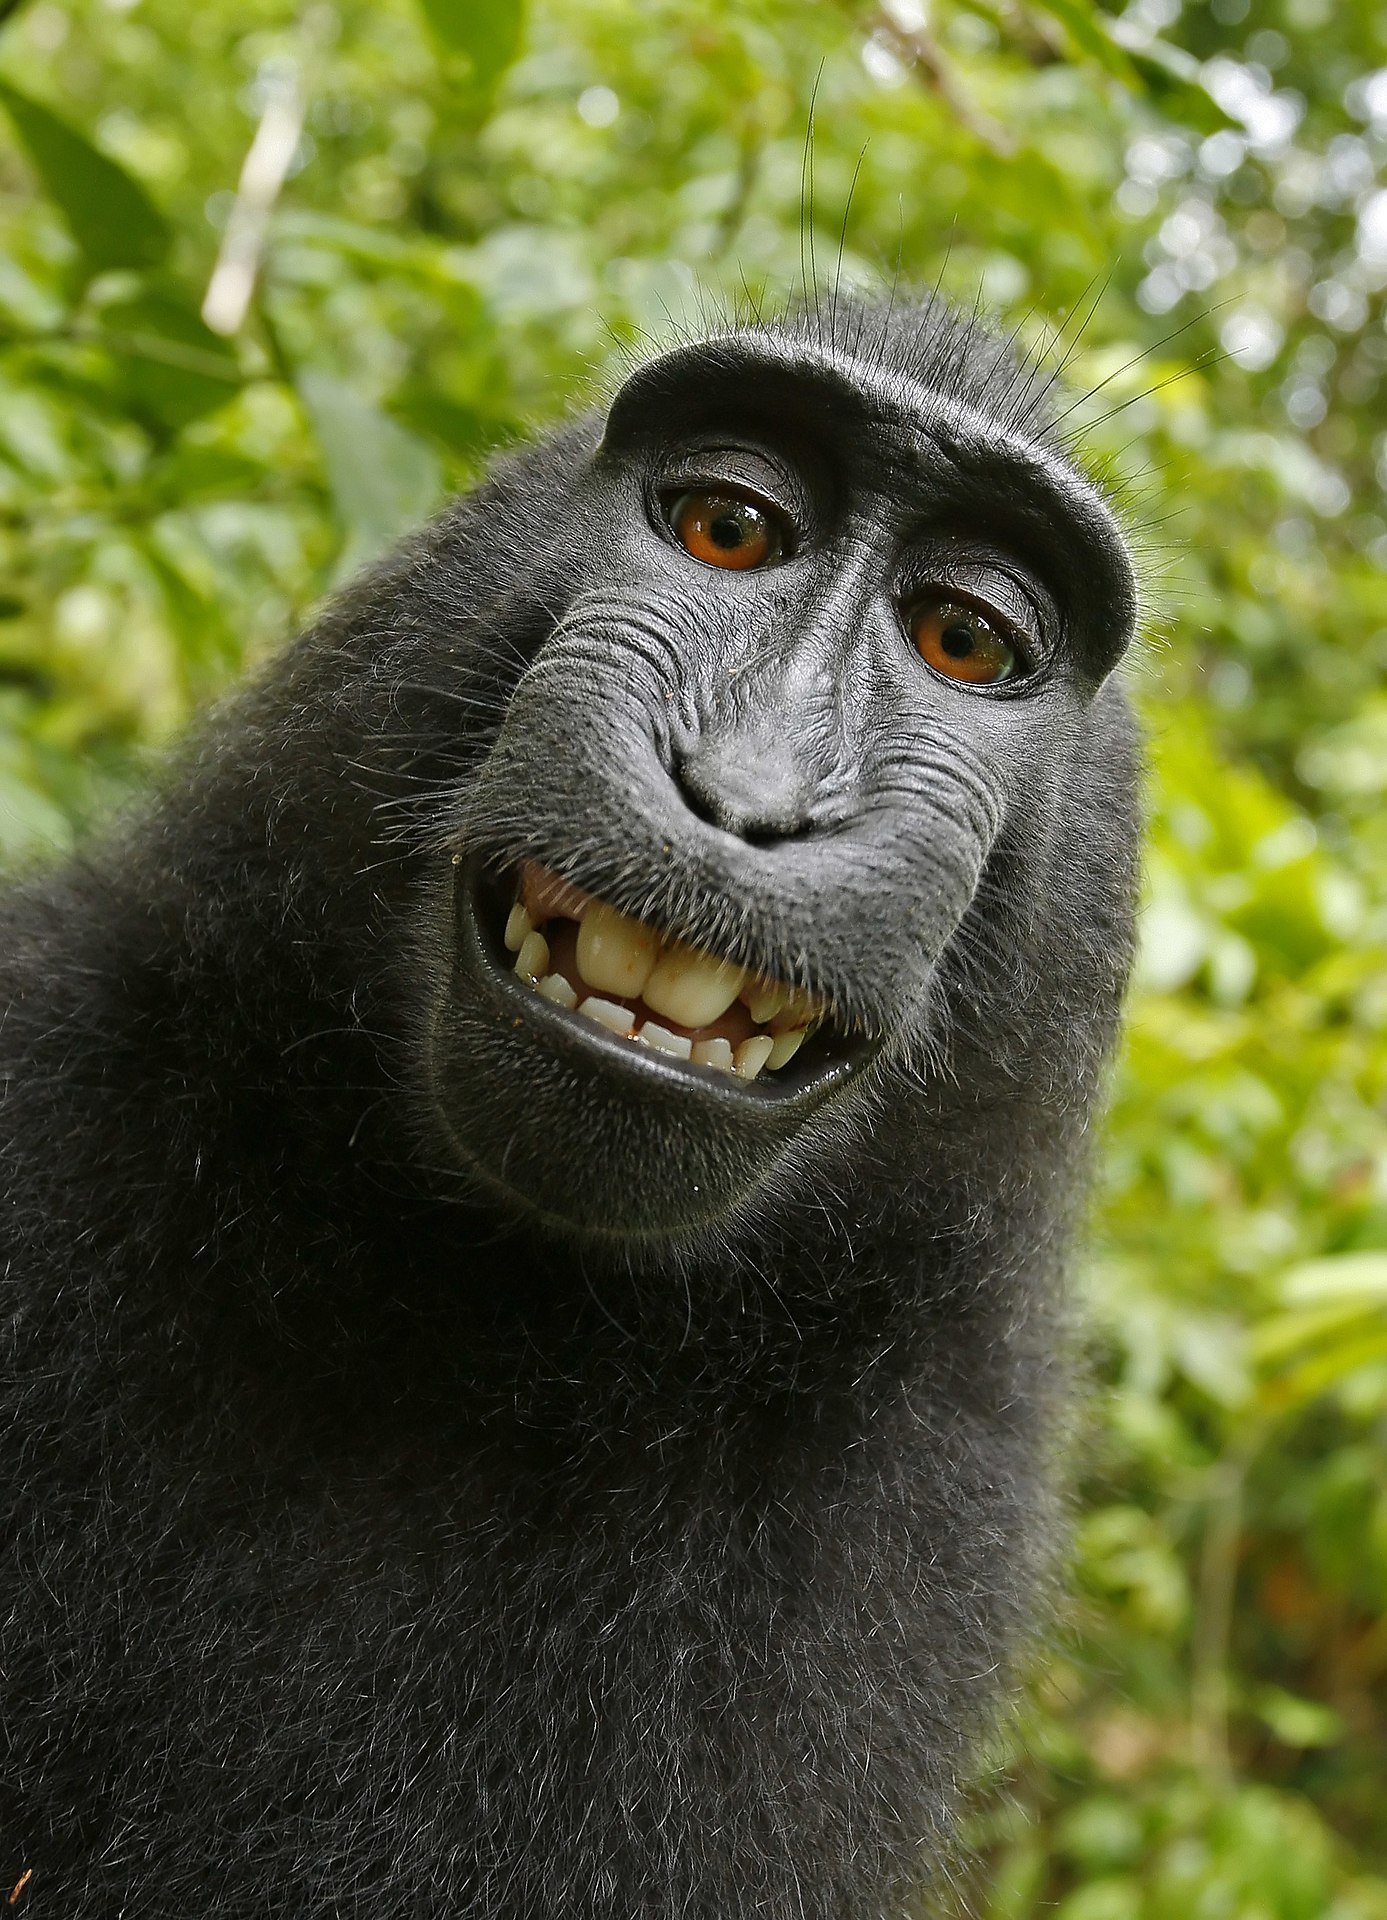 Self-portrait of a female Celebes crested macaque (Macaca nigra) in North Sulawesi, Indonesia, who had picked up photographer David Slater's camera and photographed herself with it. The “Monkey selfie copyright dispute” raged on for years to decide who own the copyright to the image; the photographer who owned the camera, or the macaque who took the selfie.